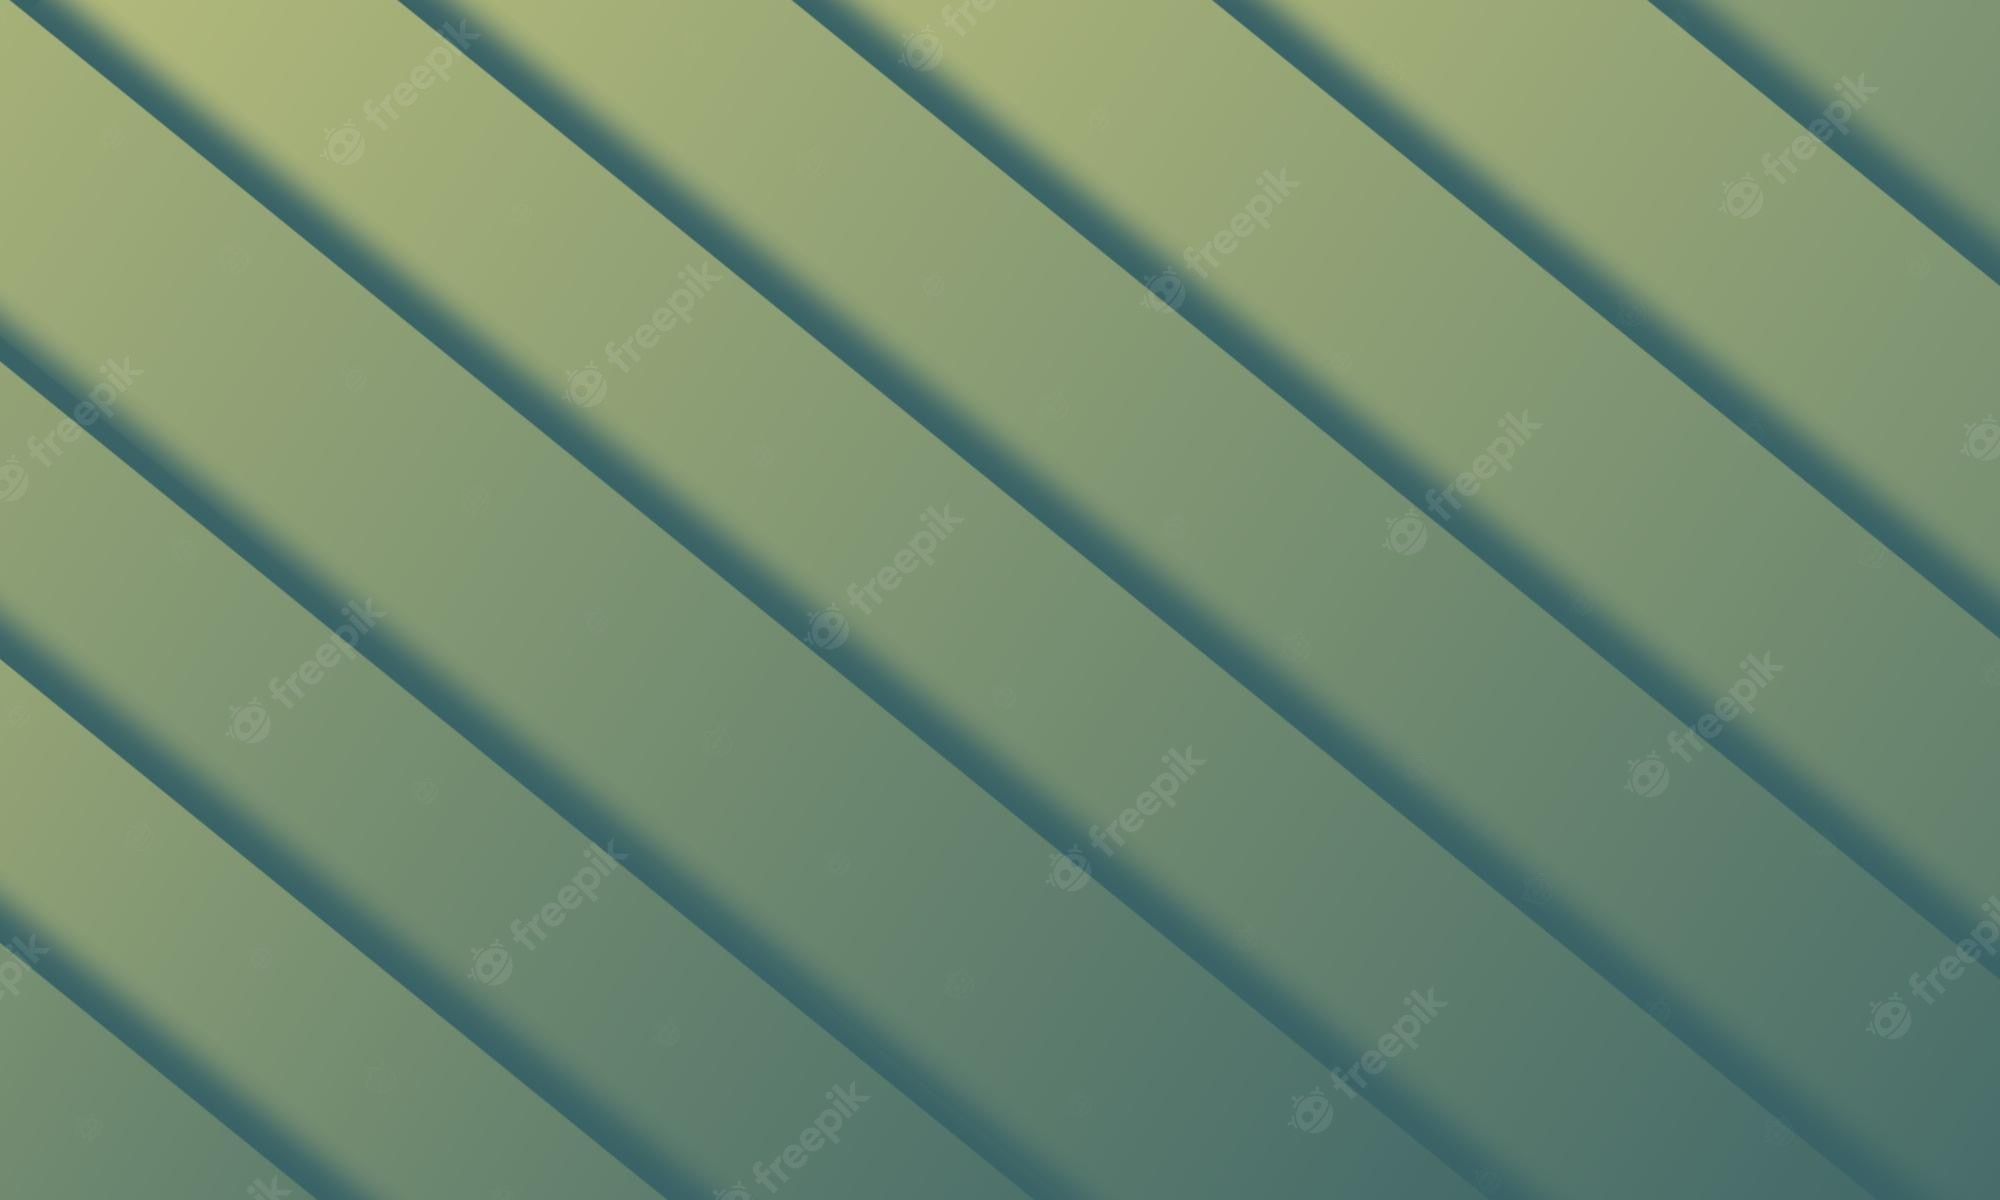 Diagonal lines on a green background - Computer